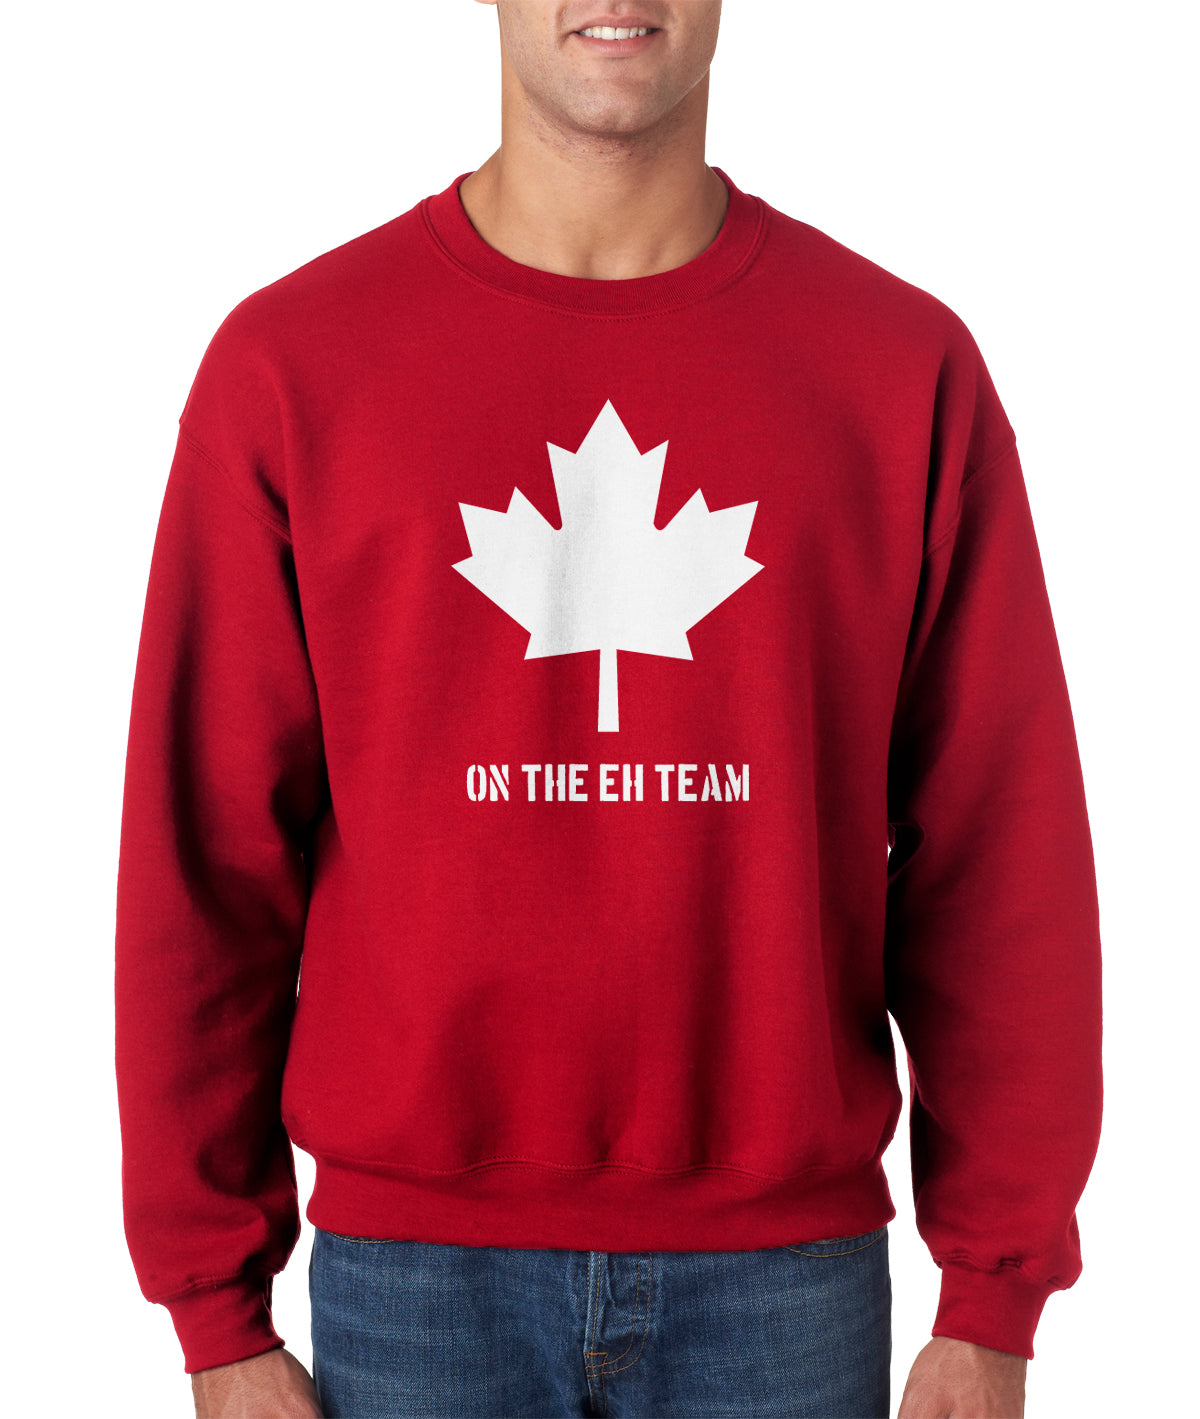 Funny Red On The Eh Team Sweatshirt Nerdy Canada Tee